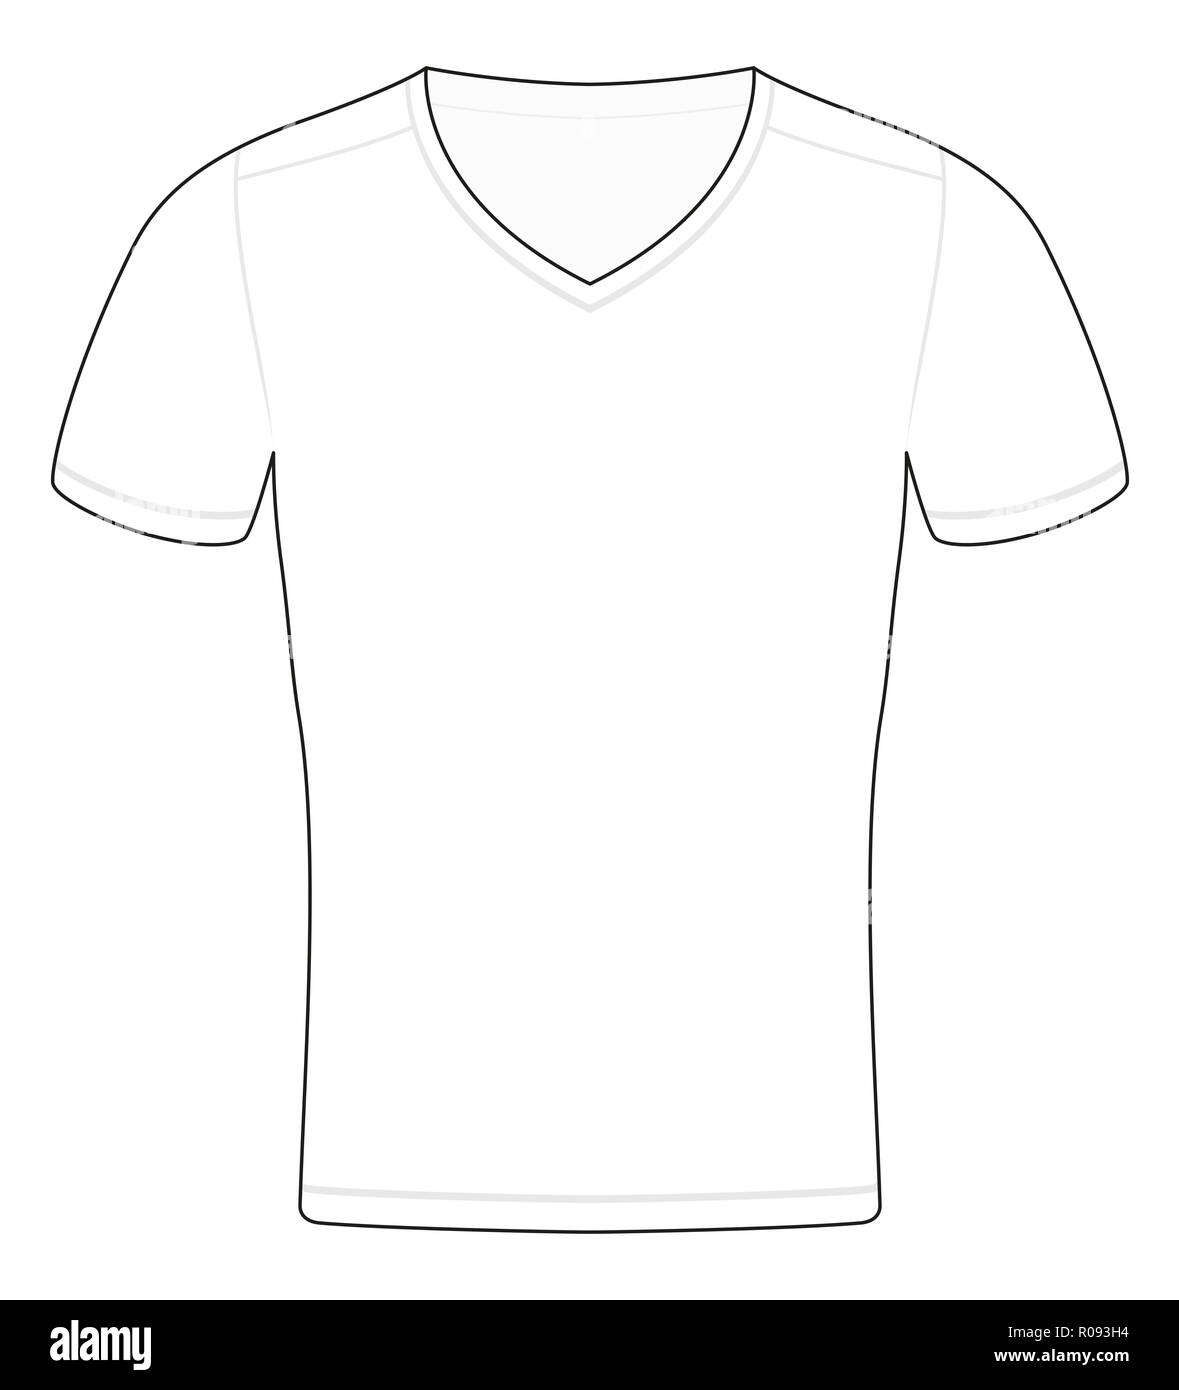 T-Shirt template. Outline illustration of a schematic sample to be colored, labelled or imaged - illustration on white background. Stock Photo